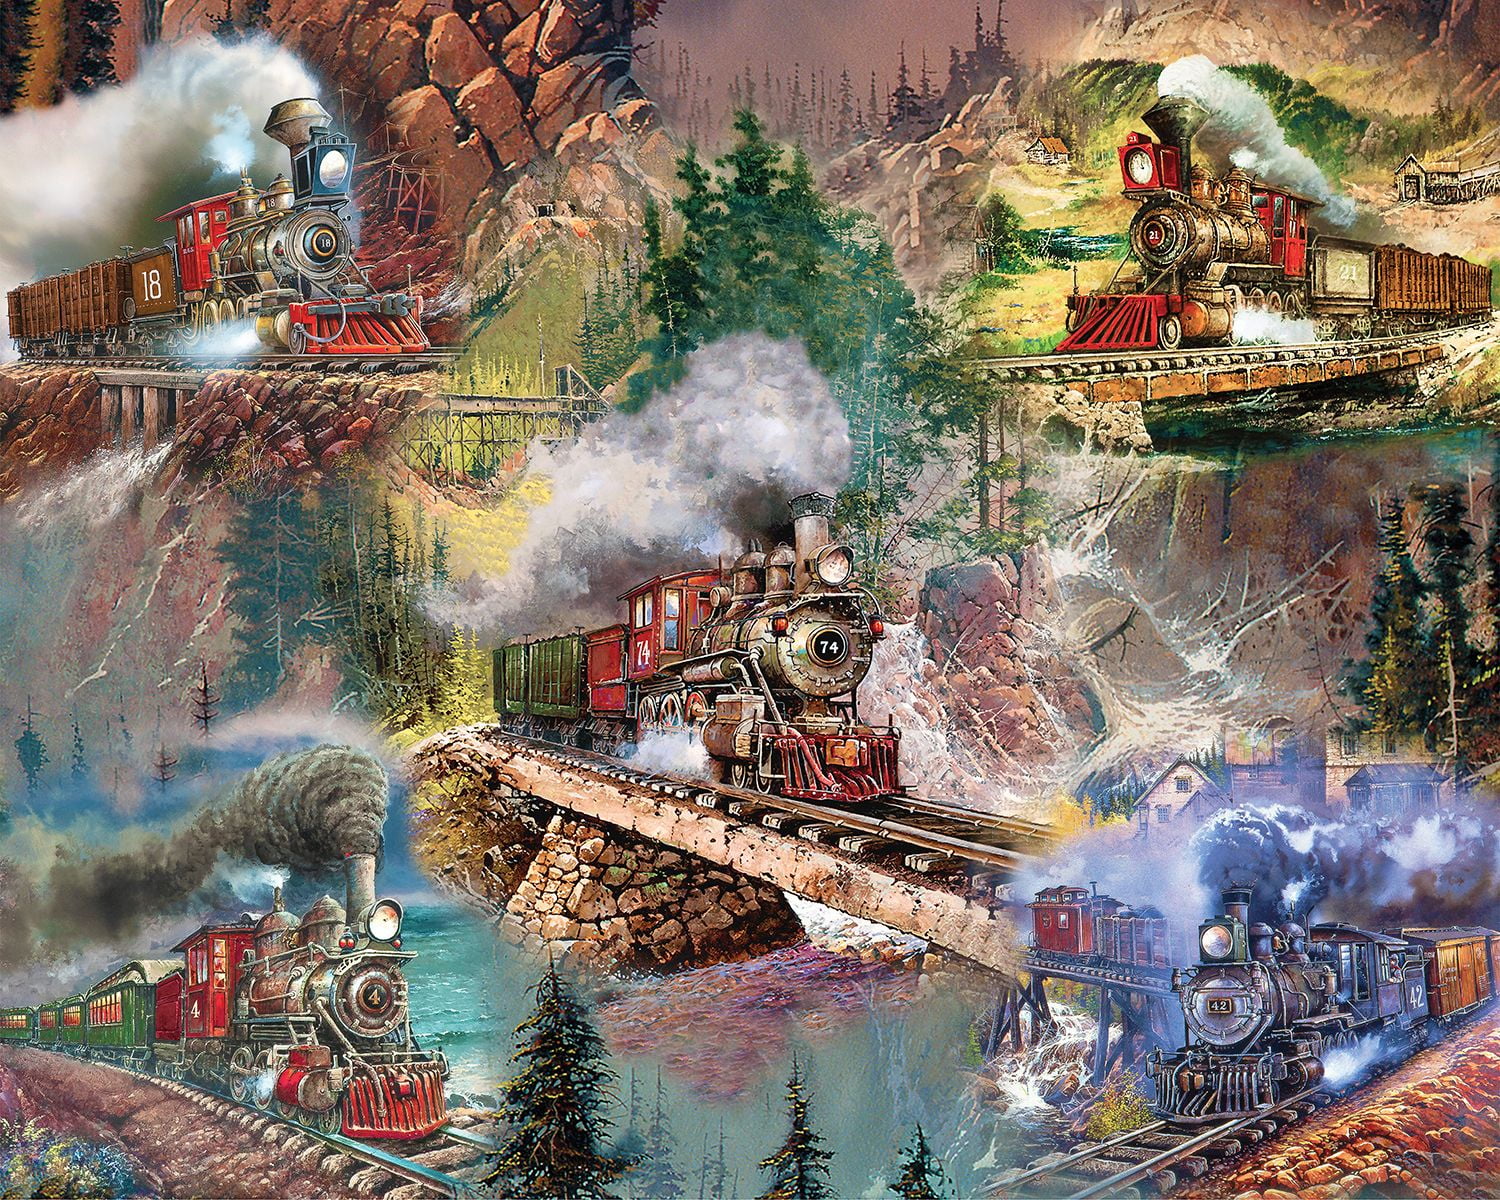 The House Of Puzzles All Aboard Unusual Pieces 500 PIECE JIGSAW PUZZLE 